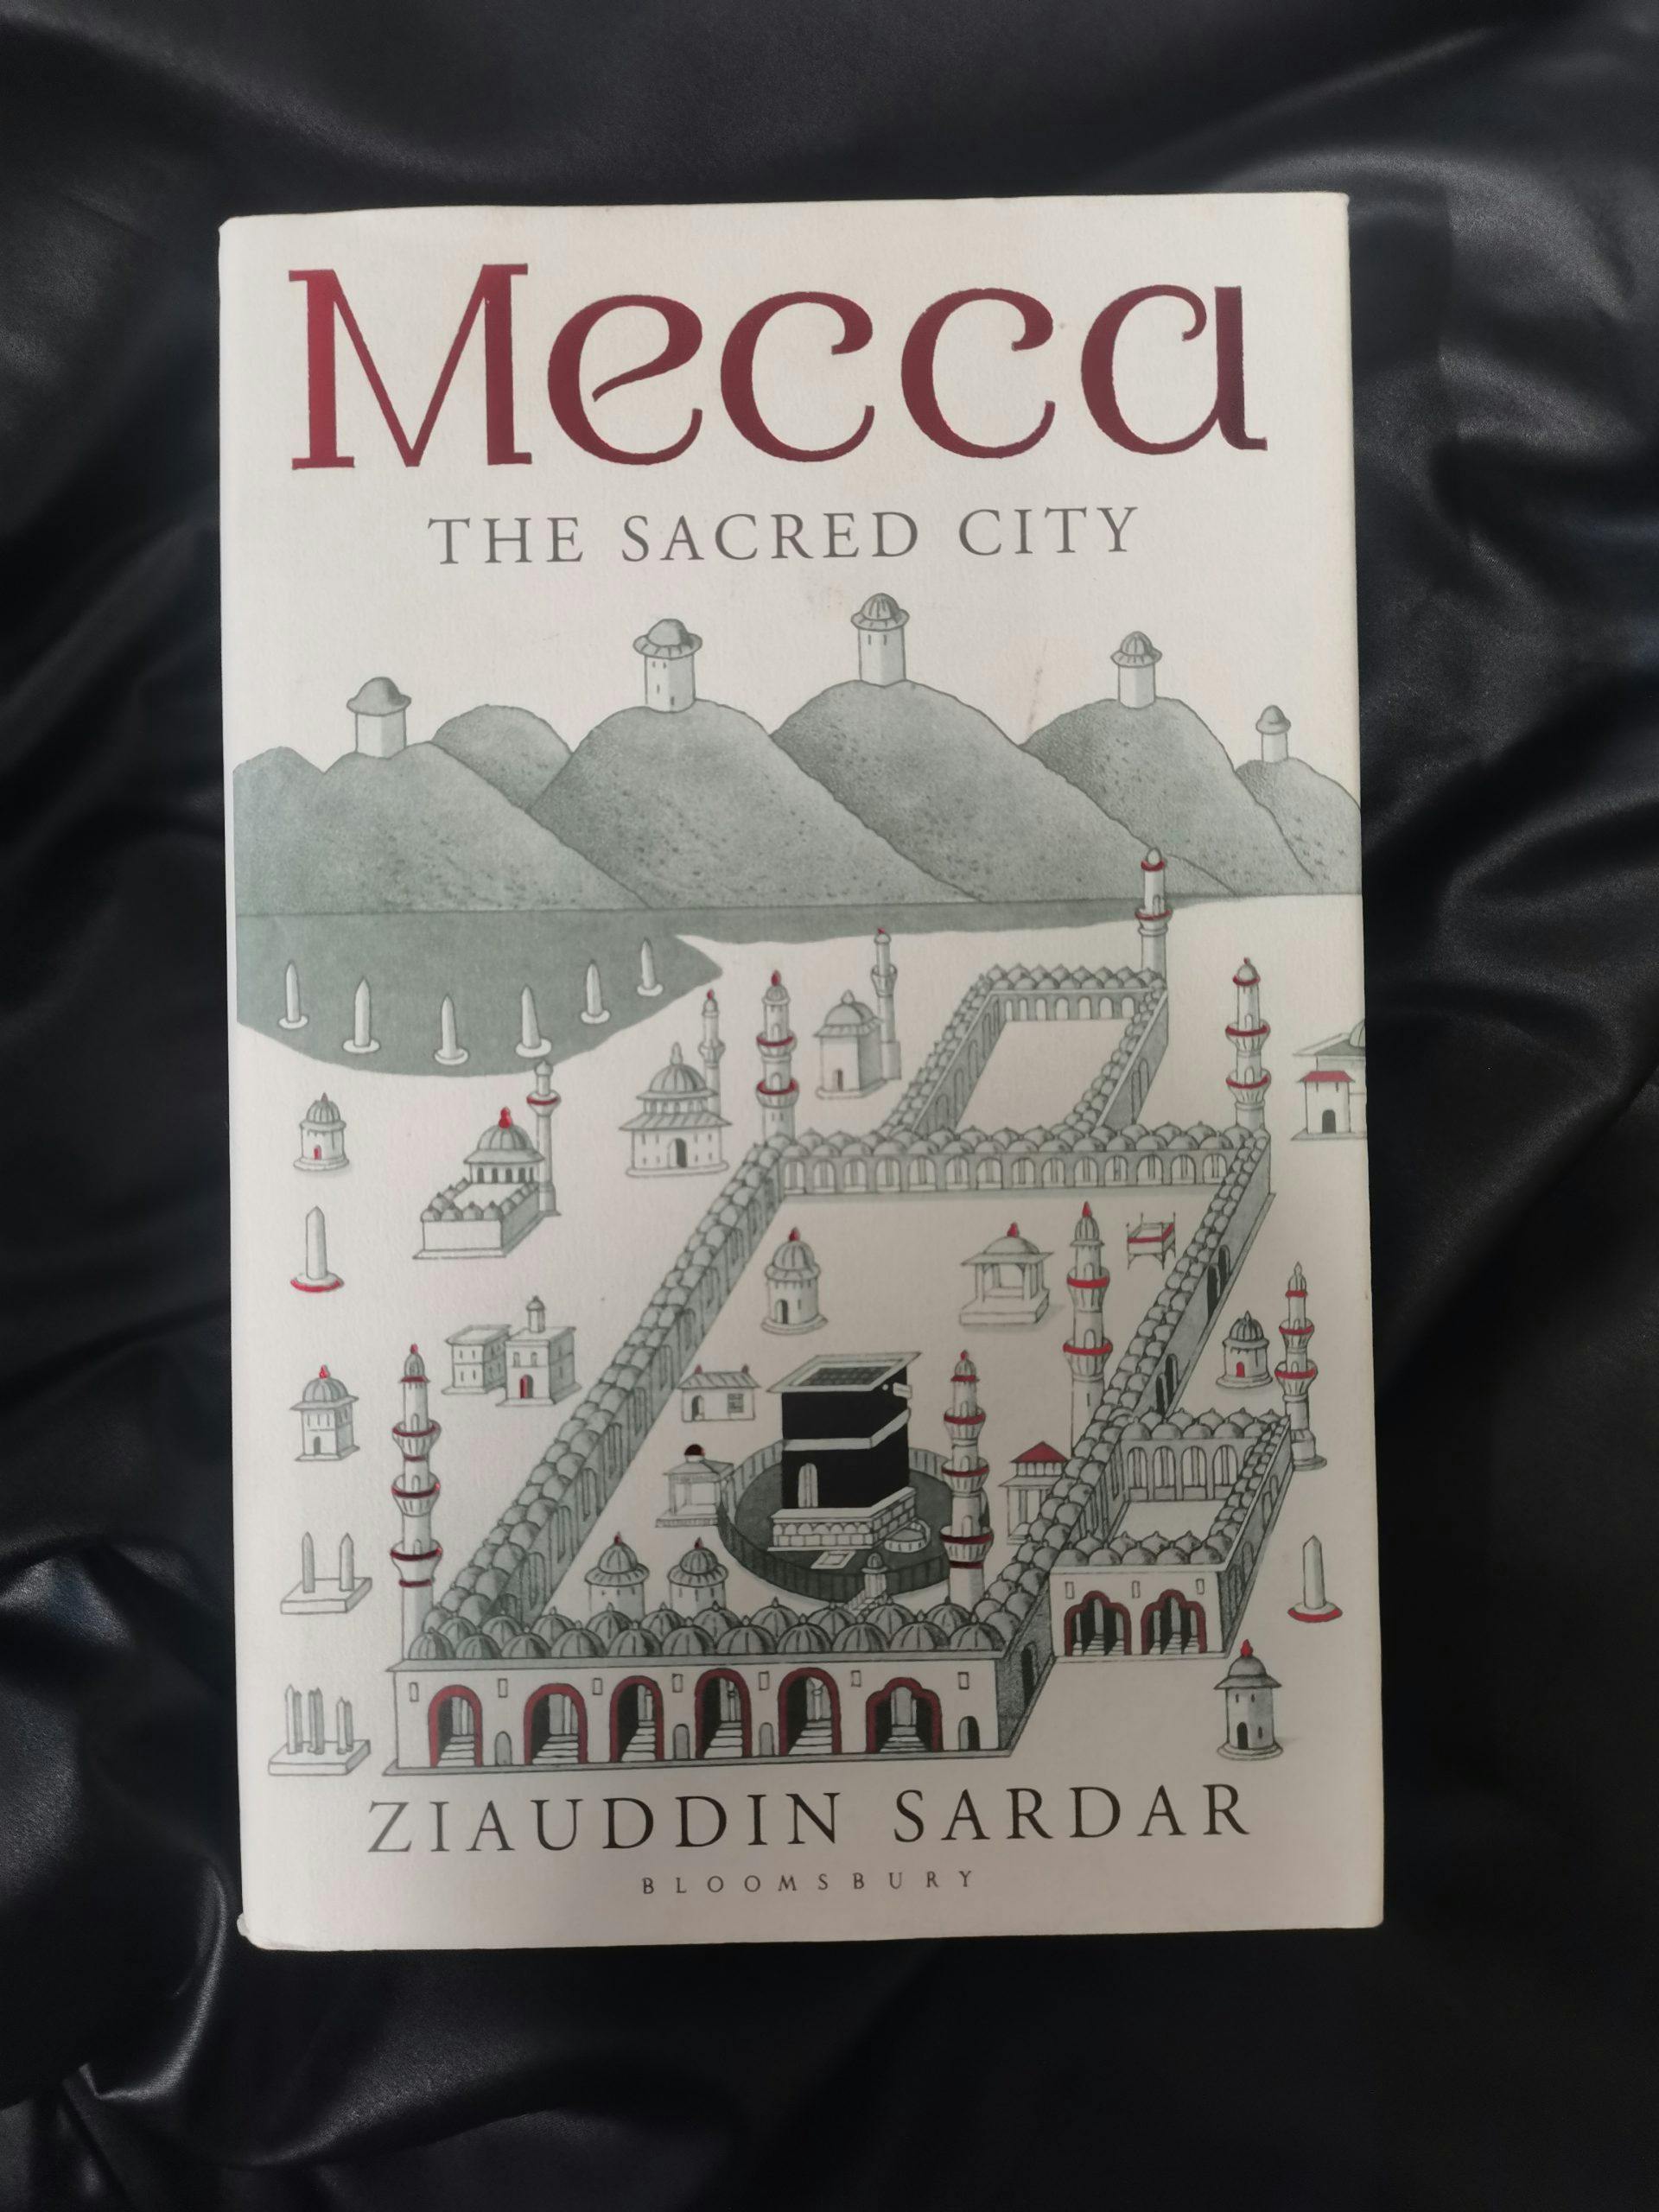 Featured image of Mecca The Sacred City